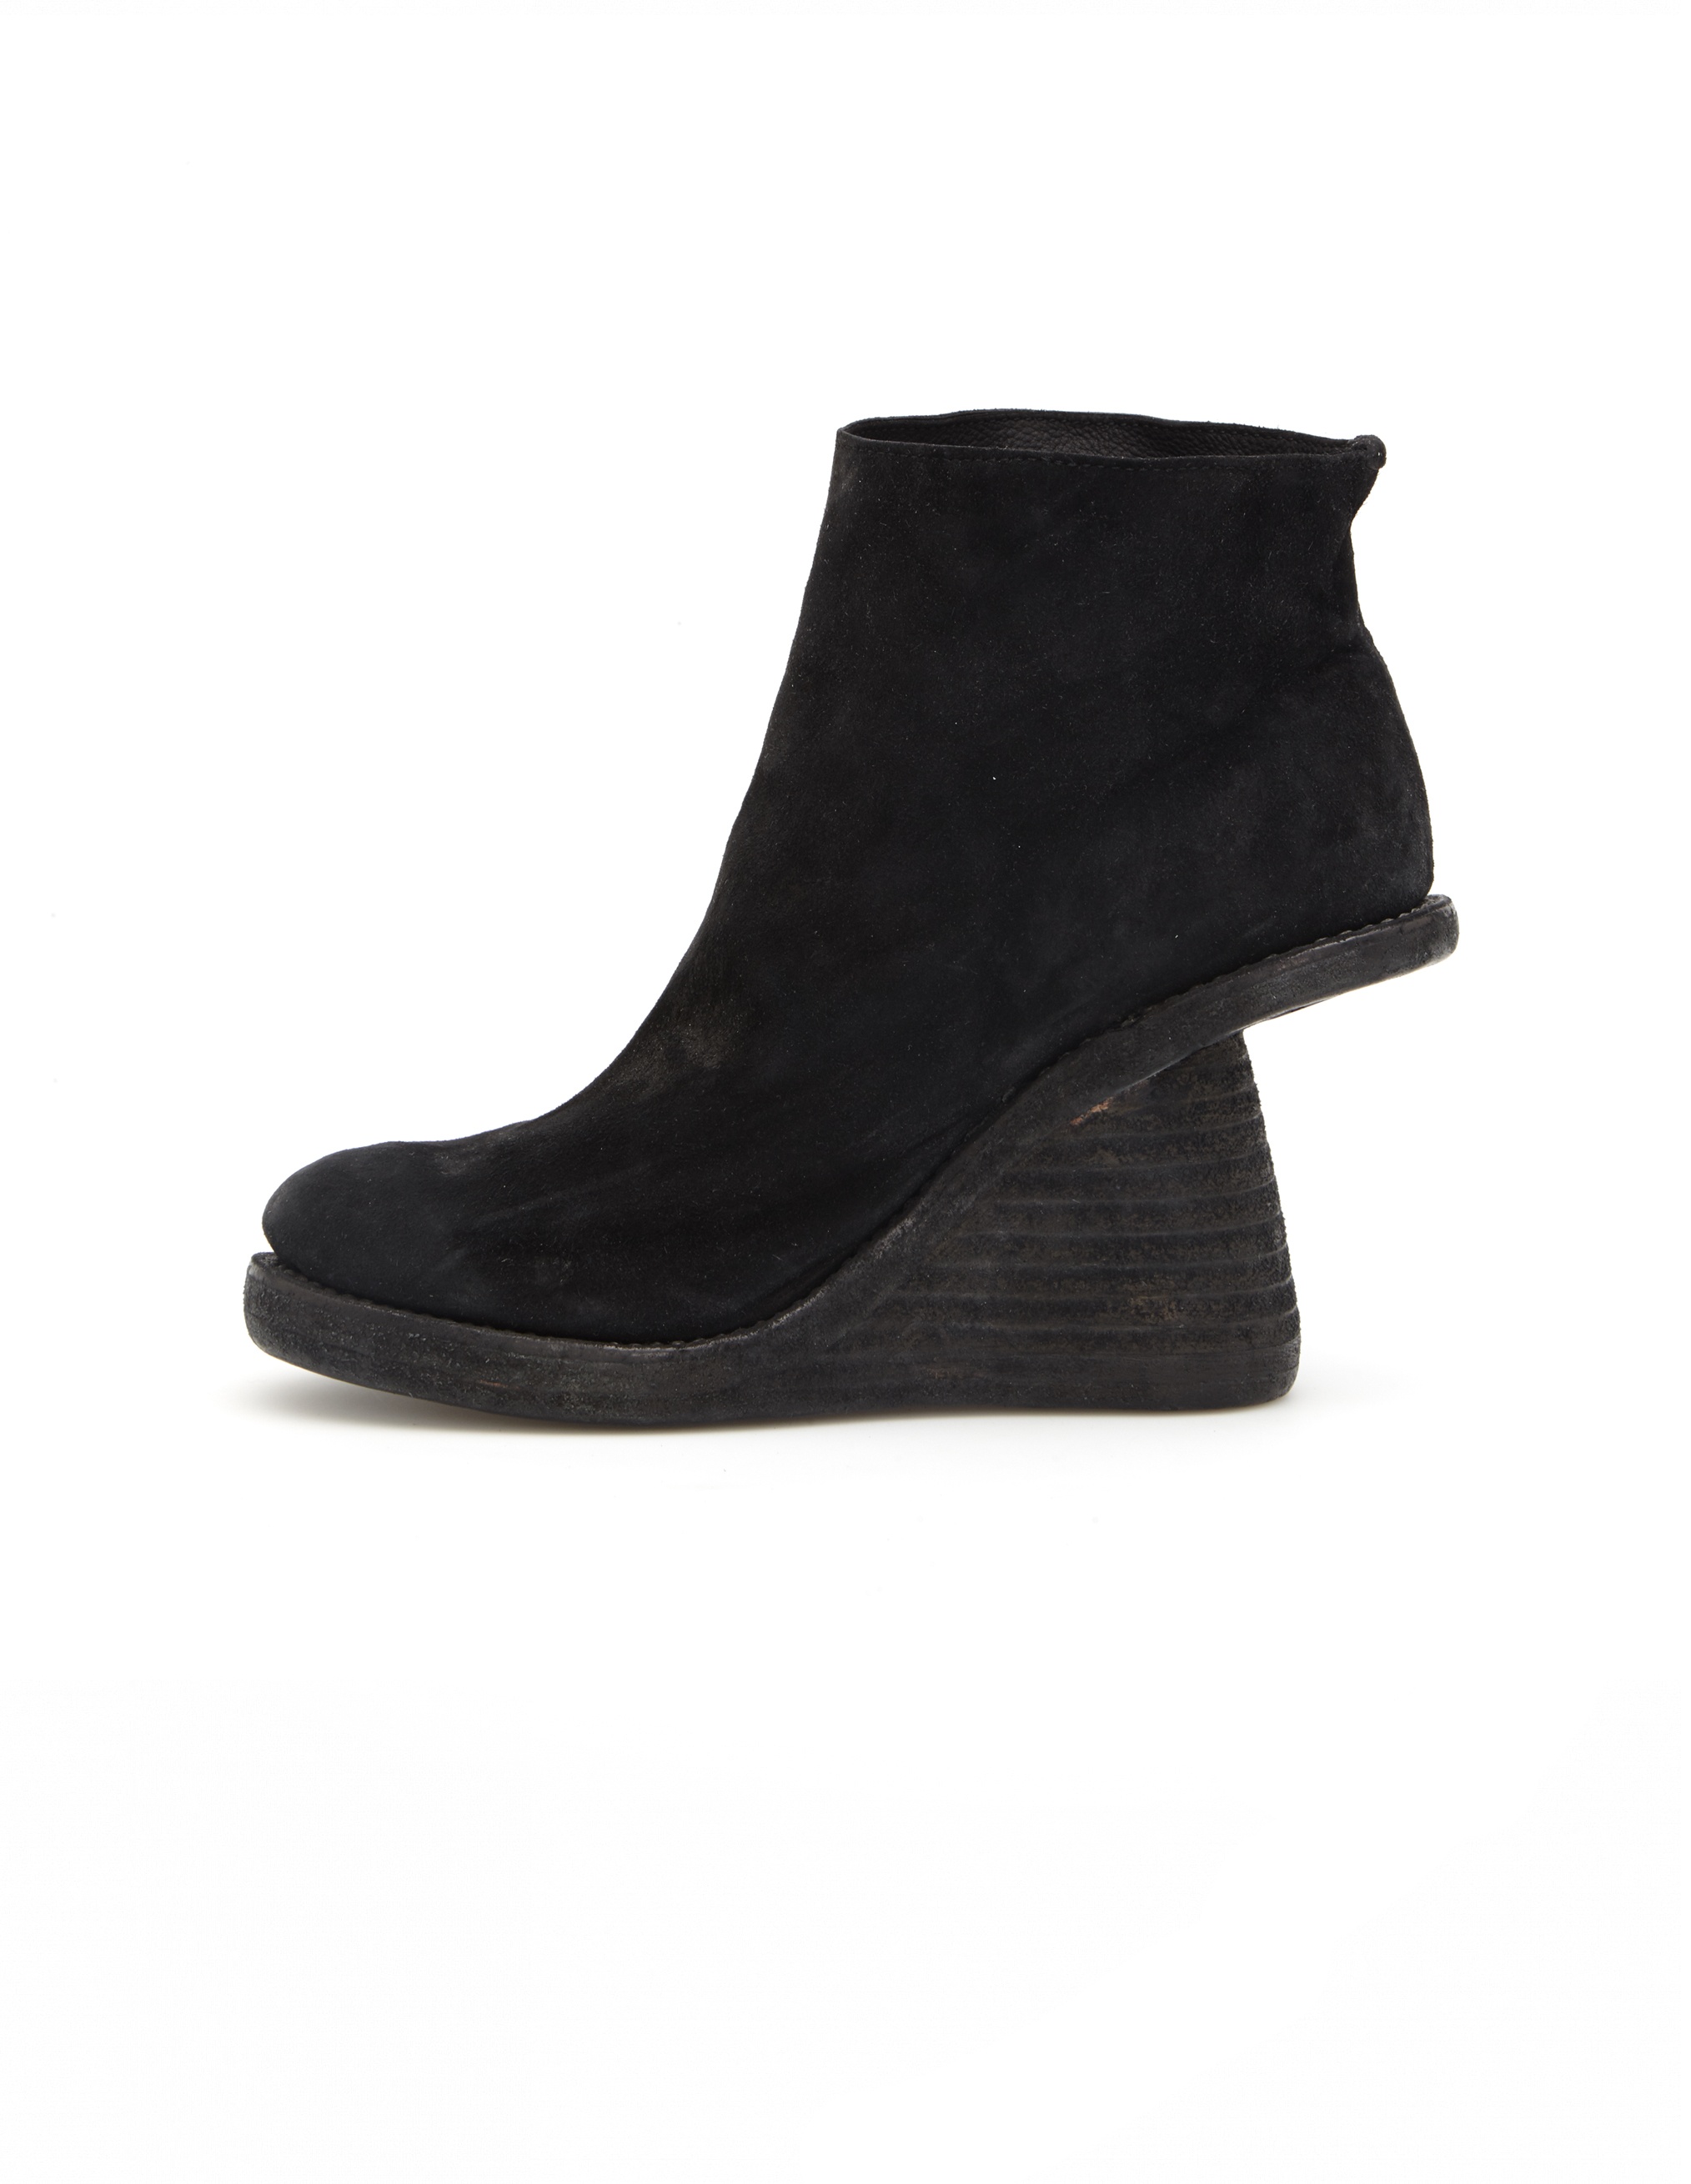 WEDGE HEEL SUEDE ANKLE BOOTS - 2